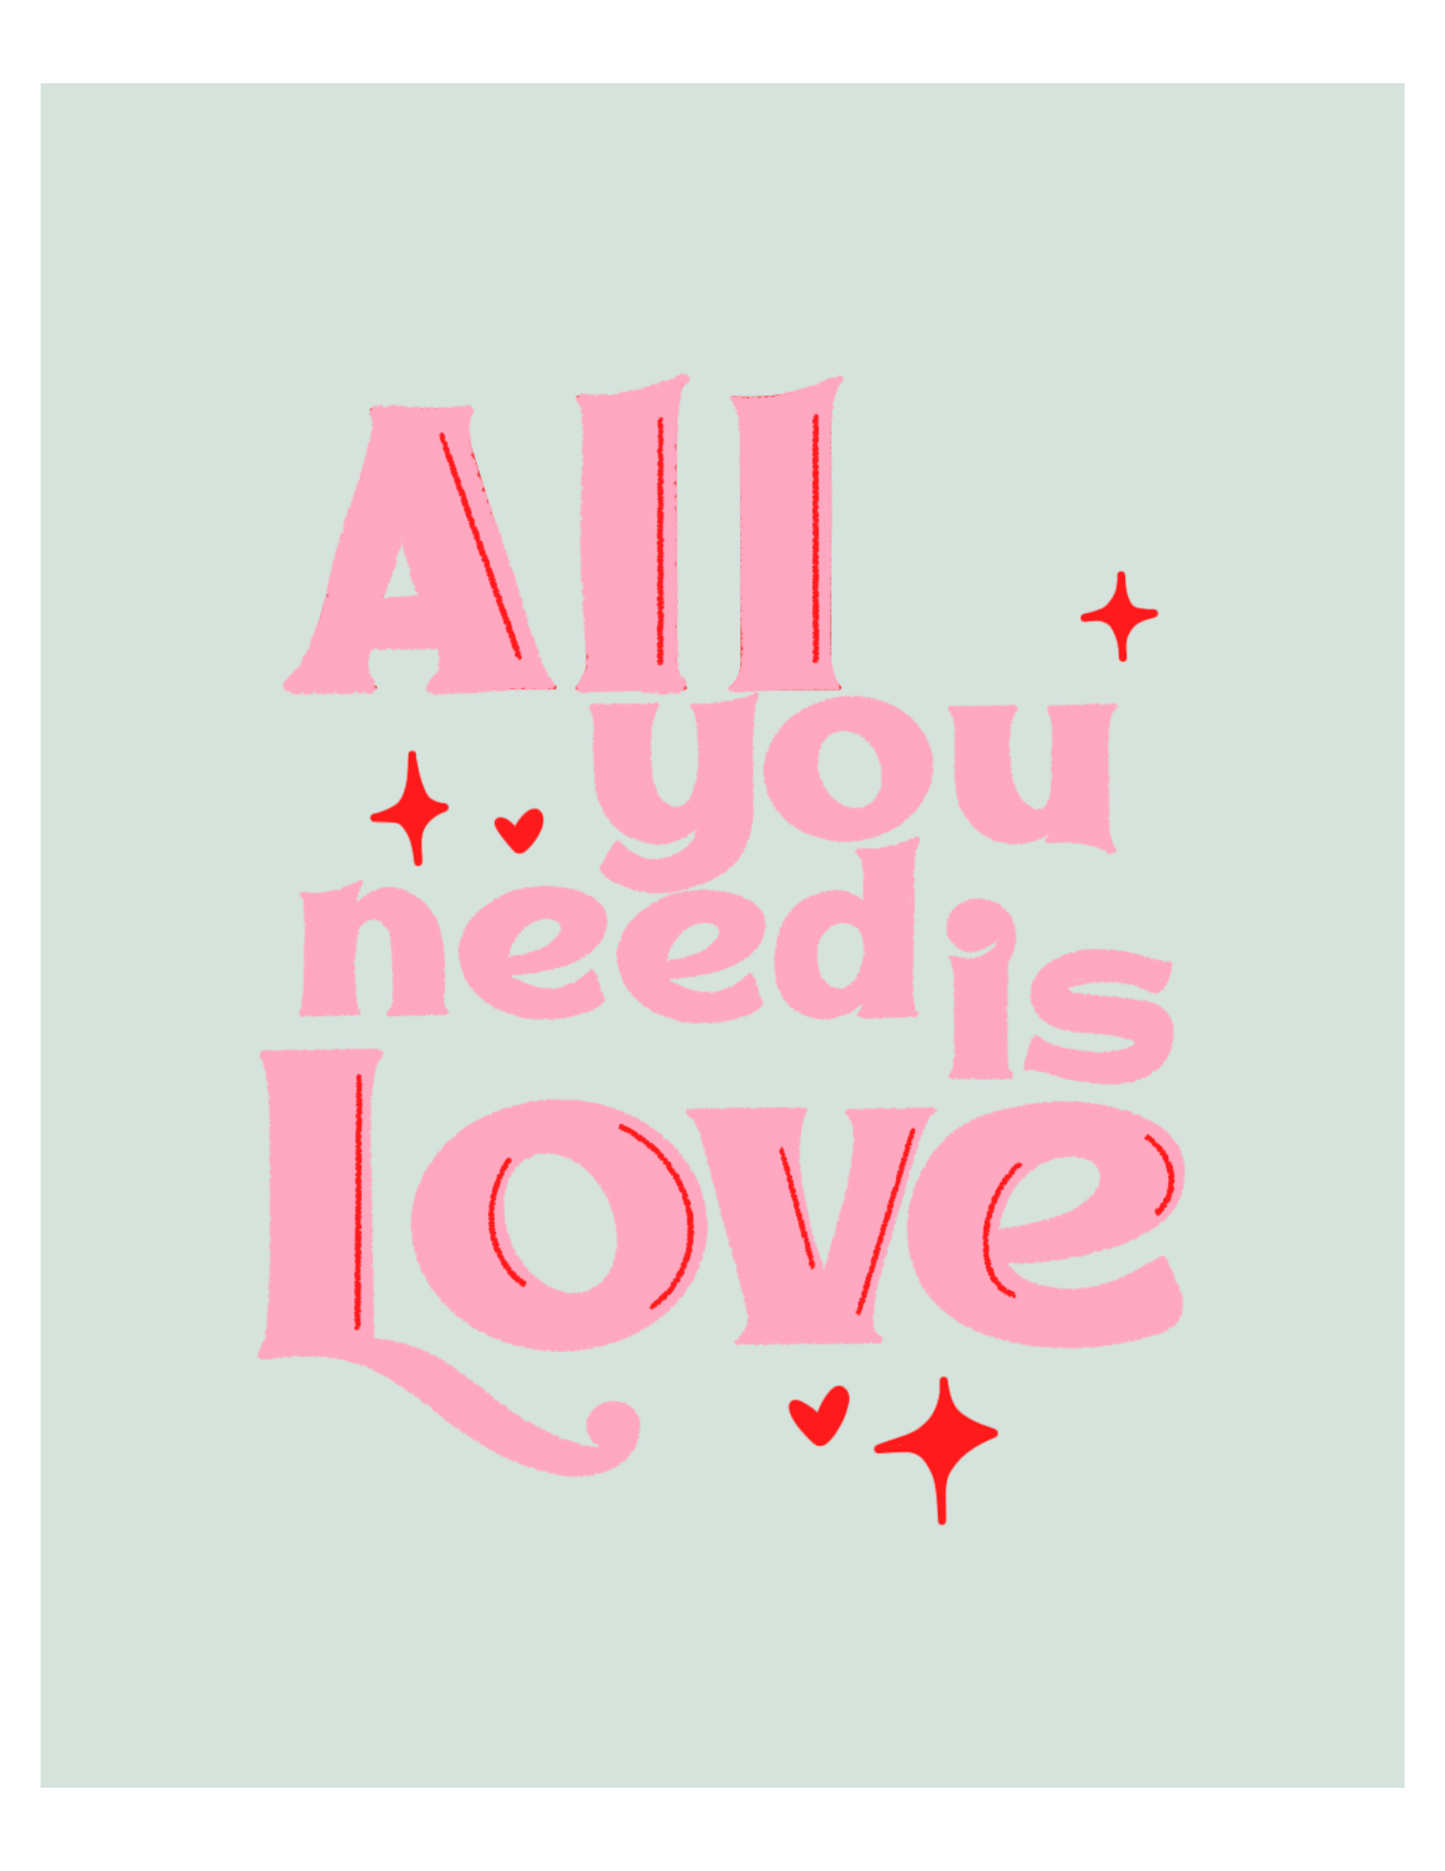 All you need is love | prints